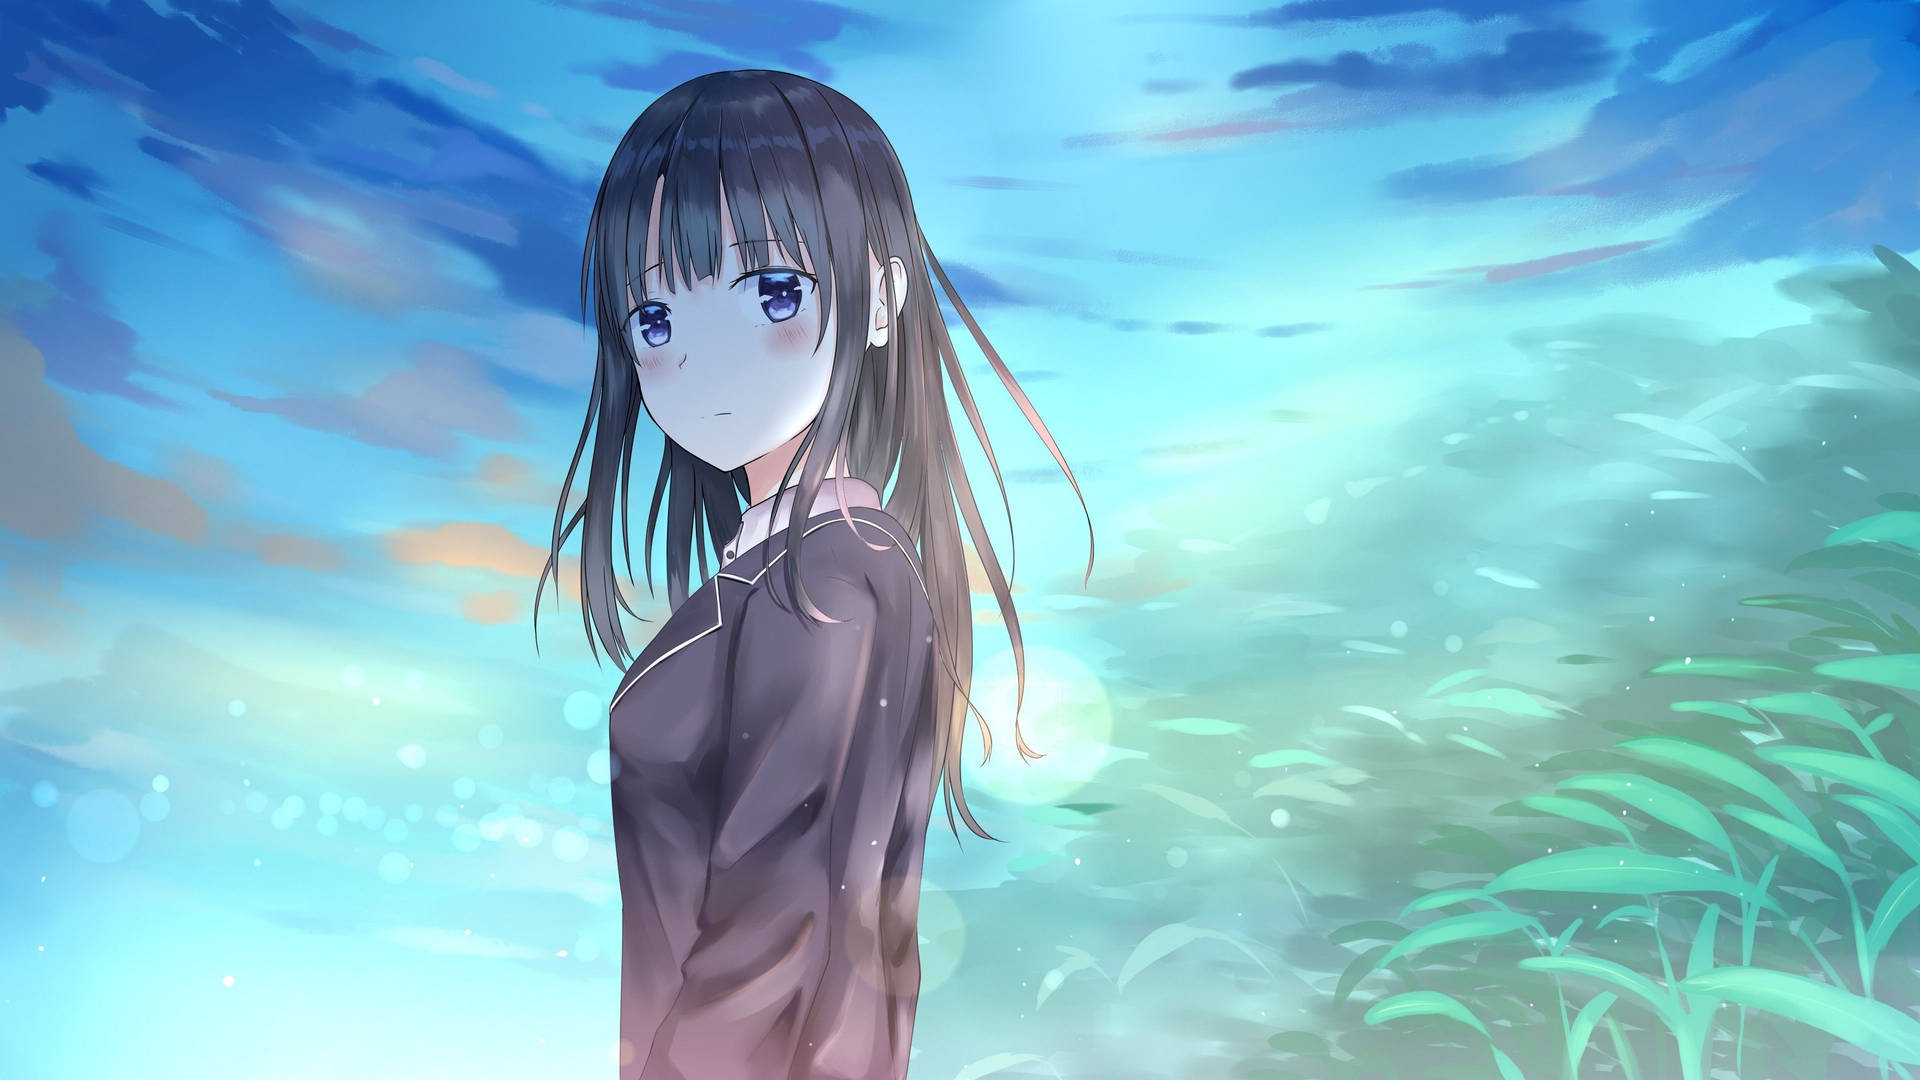 Curious Sad Anime Girl Looking Back Background